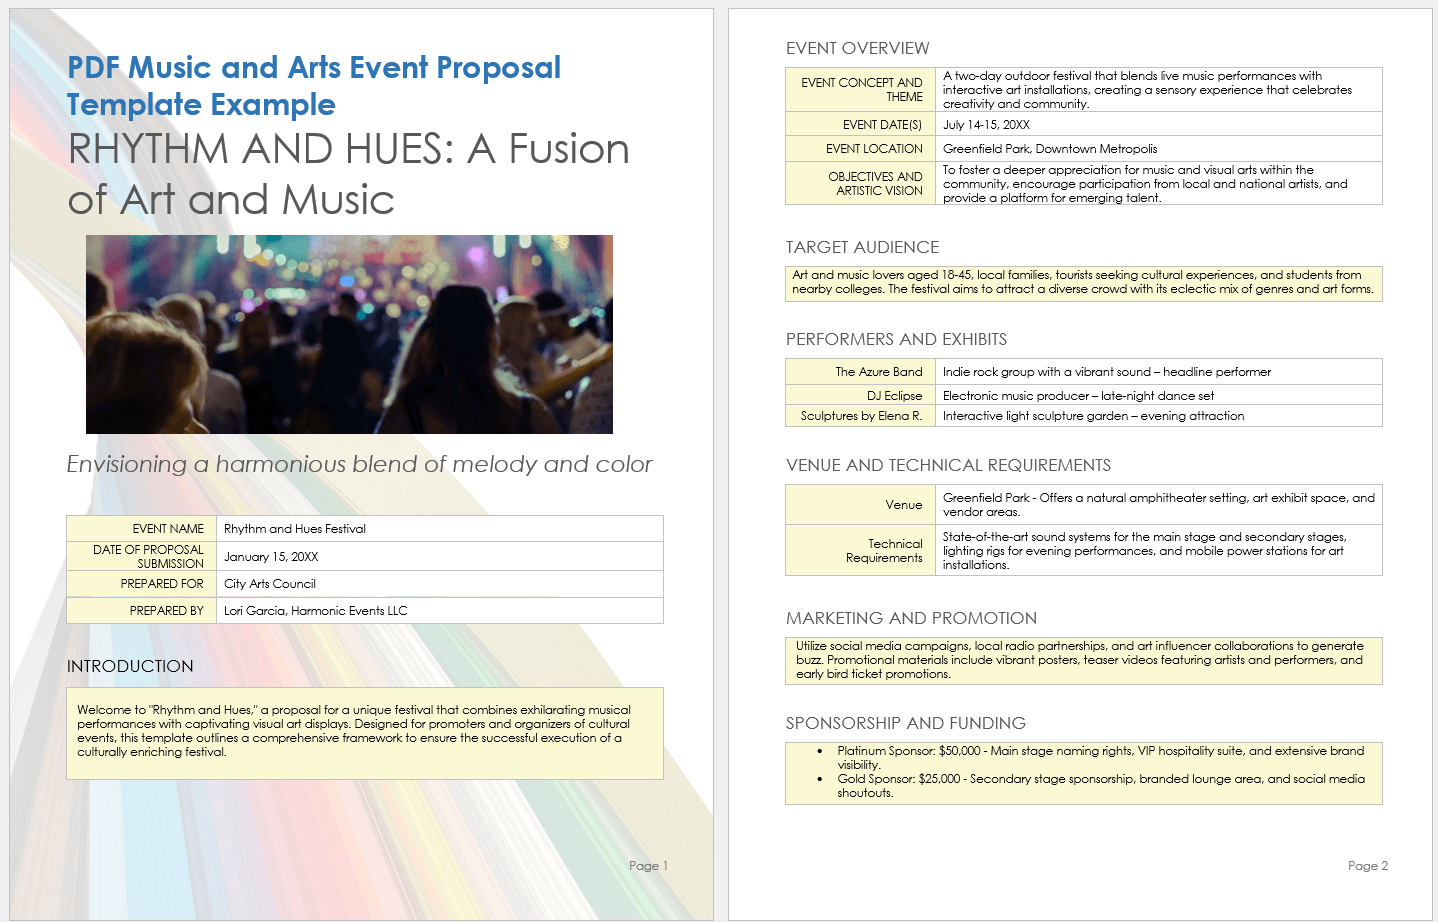 PDF Music and Arts Event Proposal Template Example